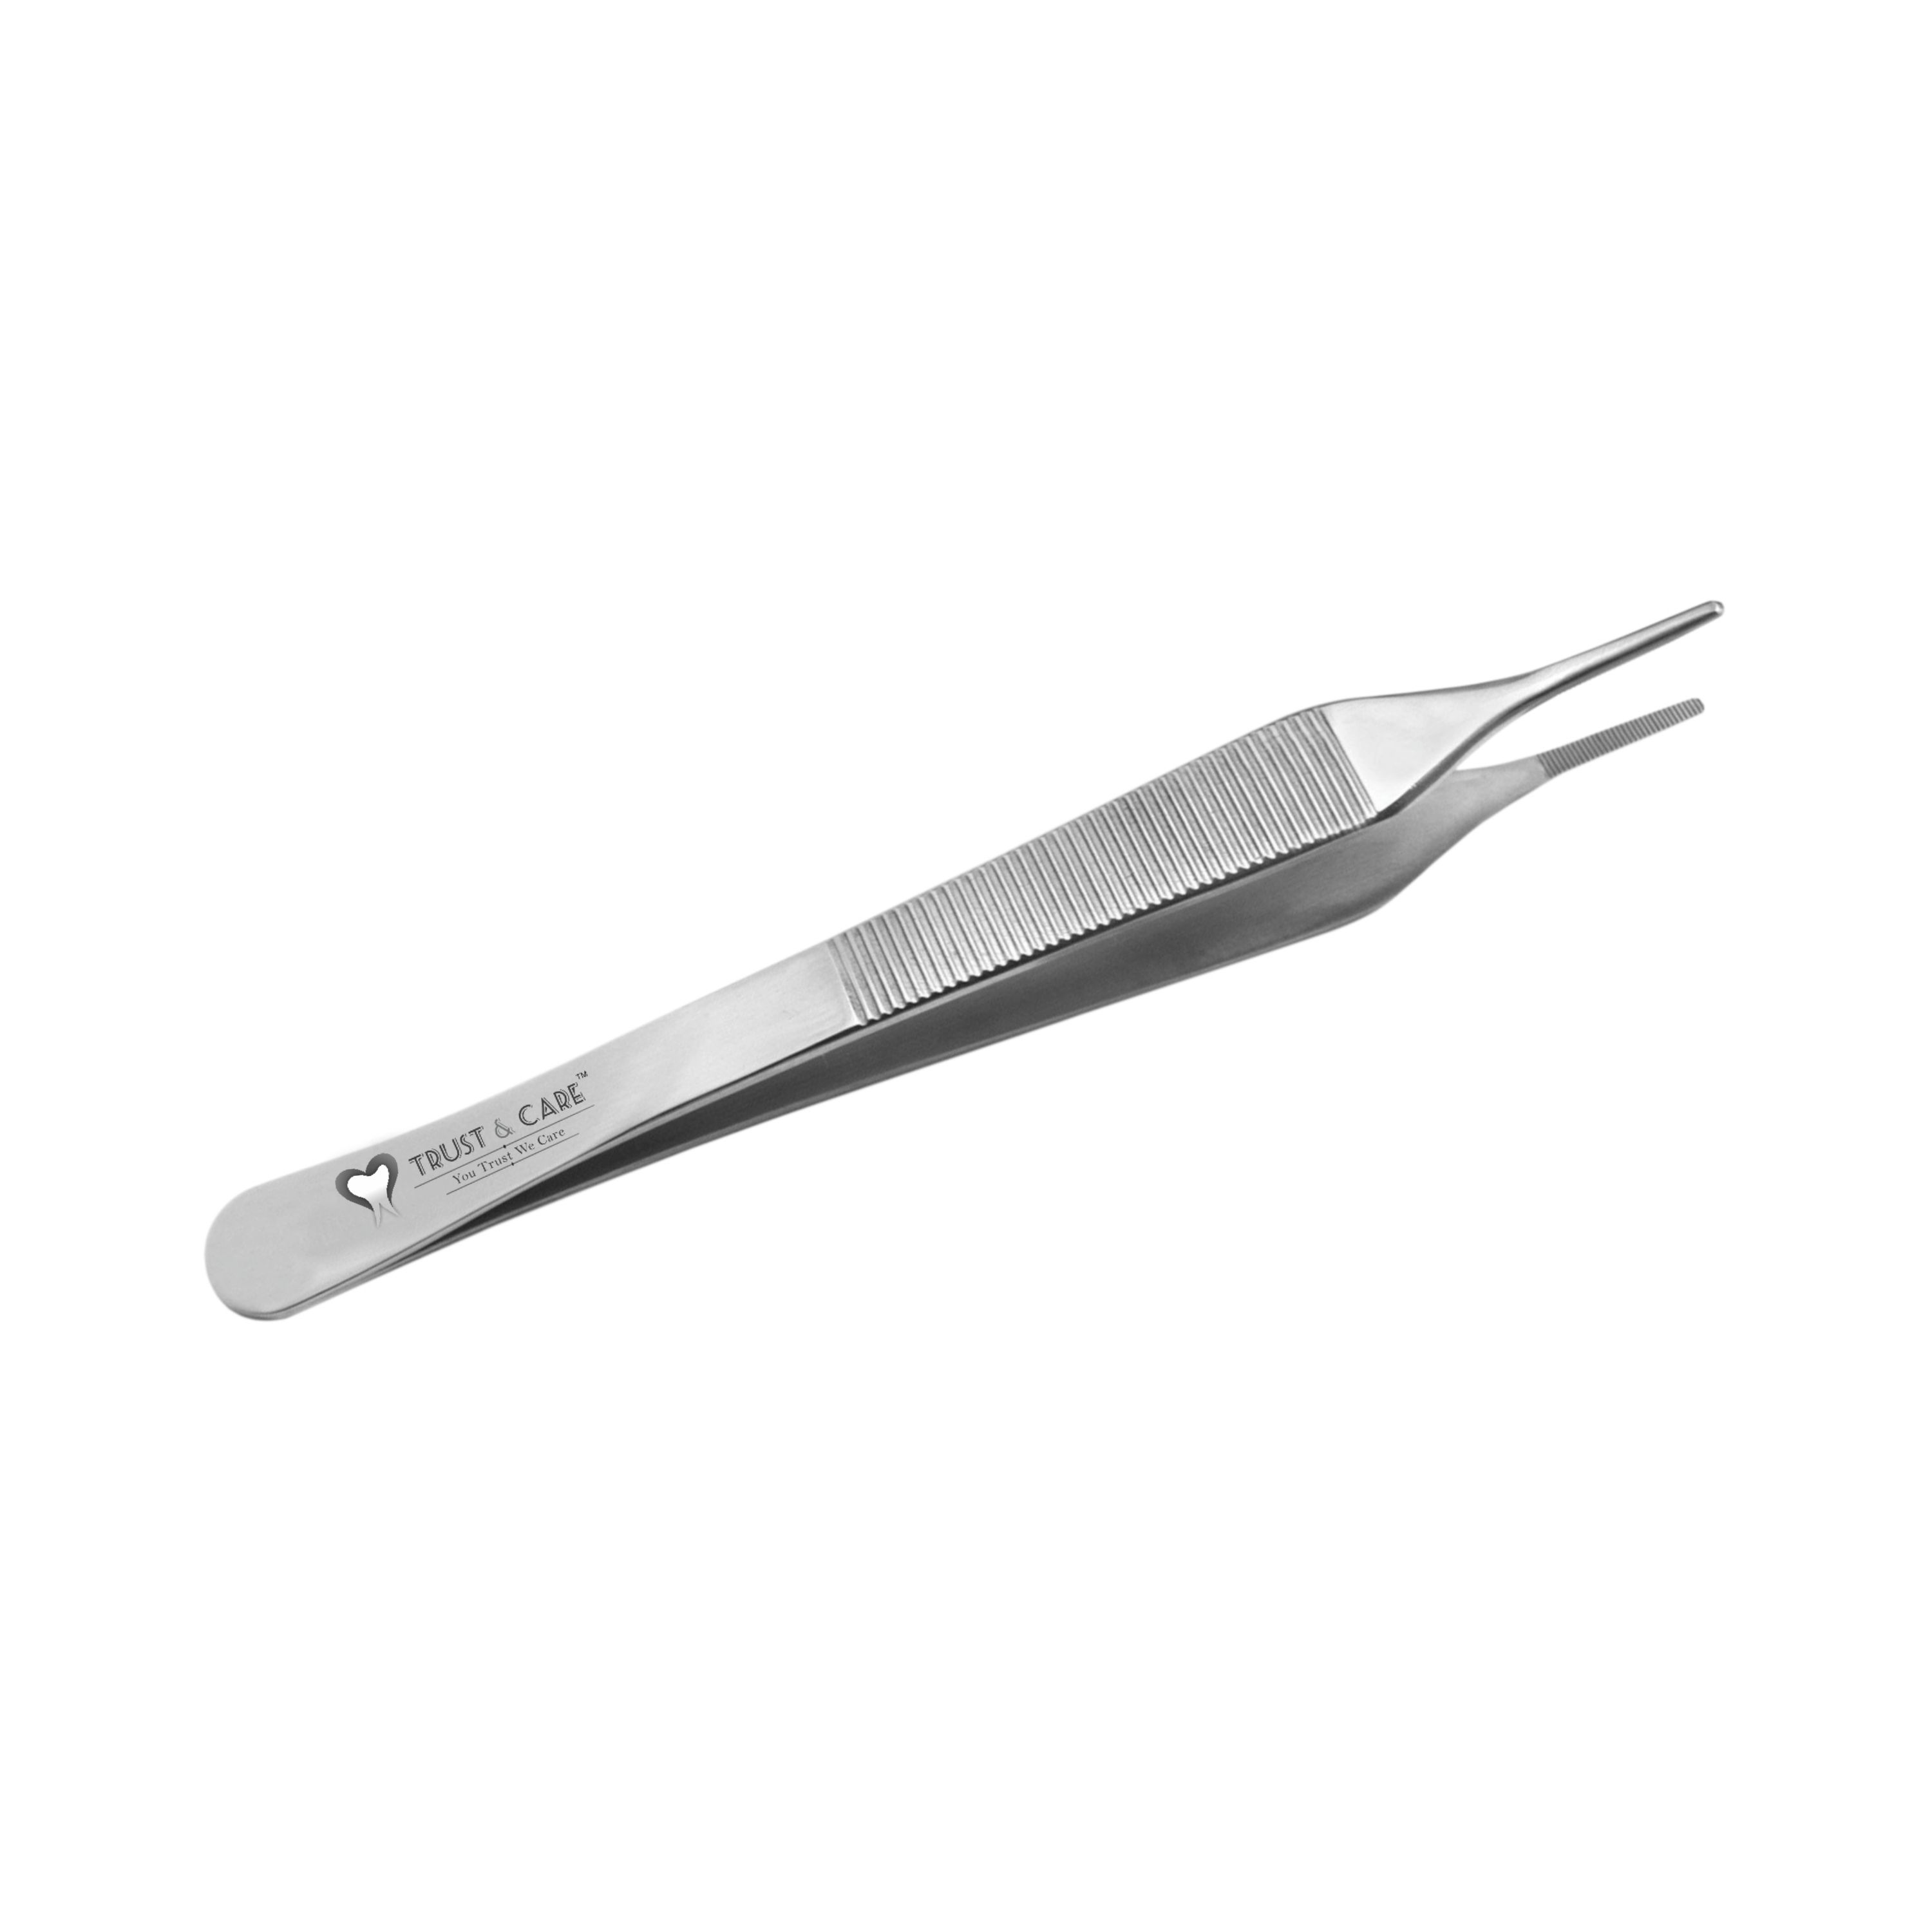 Trust & Care Tissue Adson Forcep Without Tooth Large